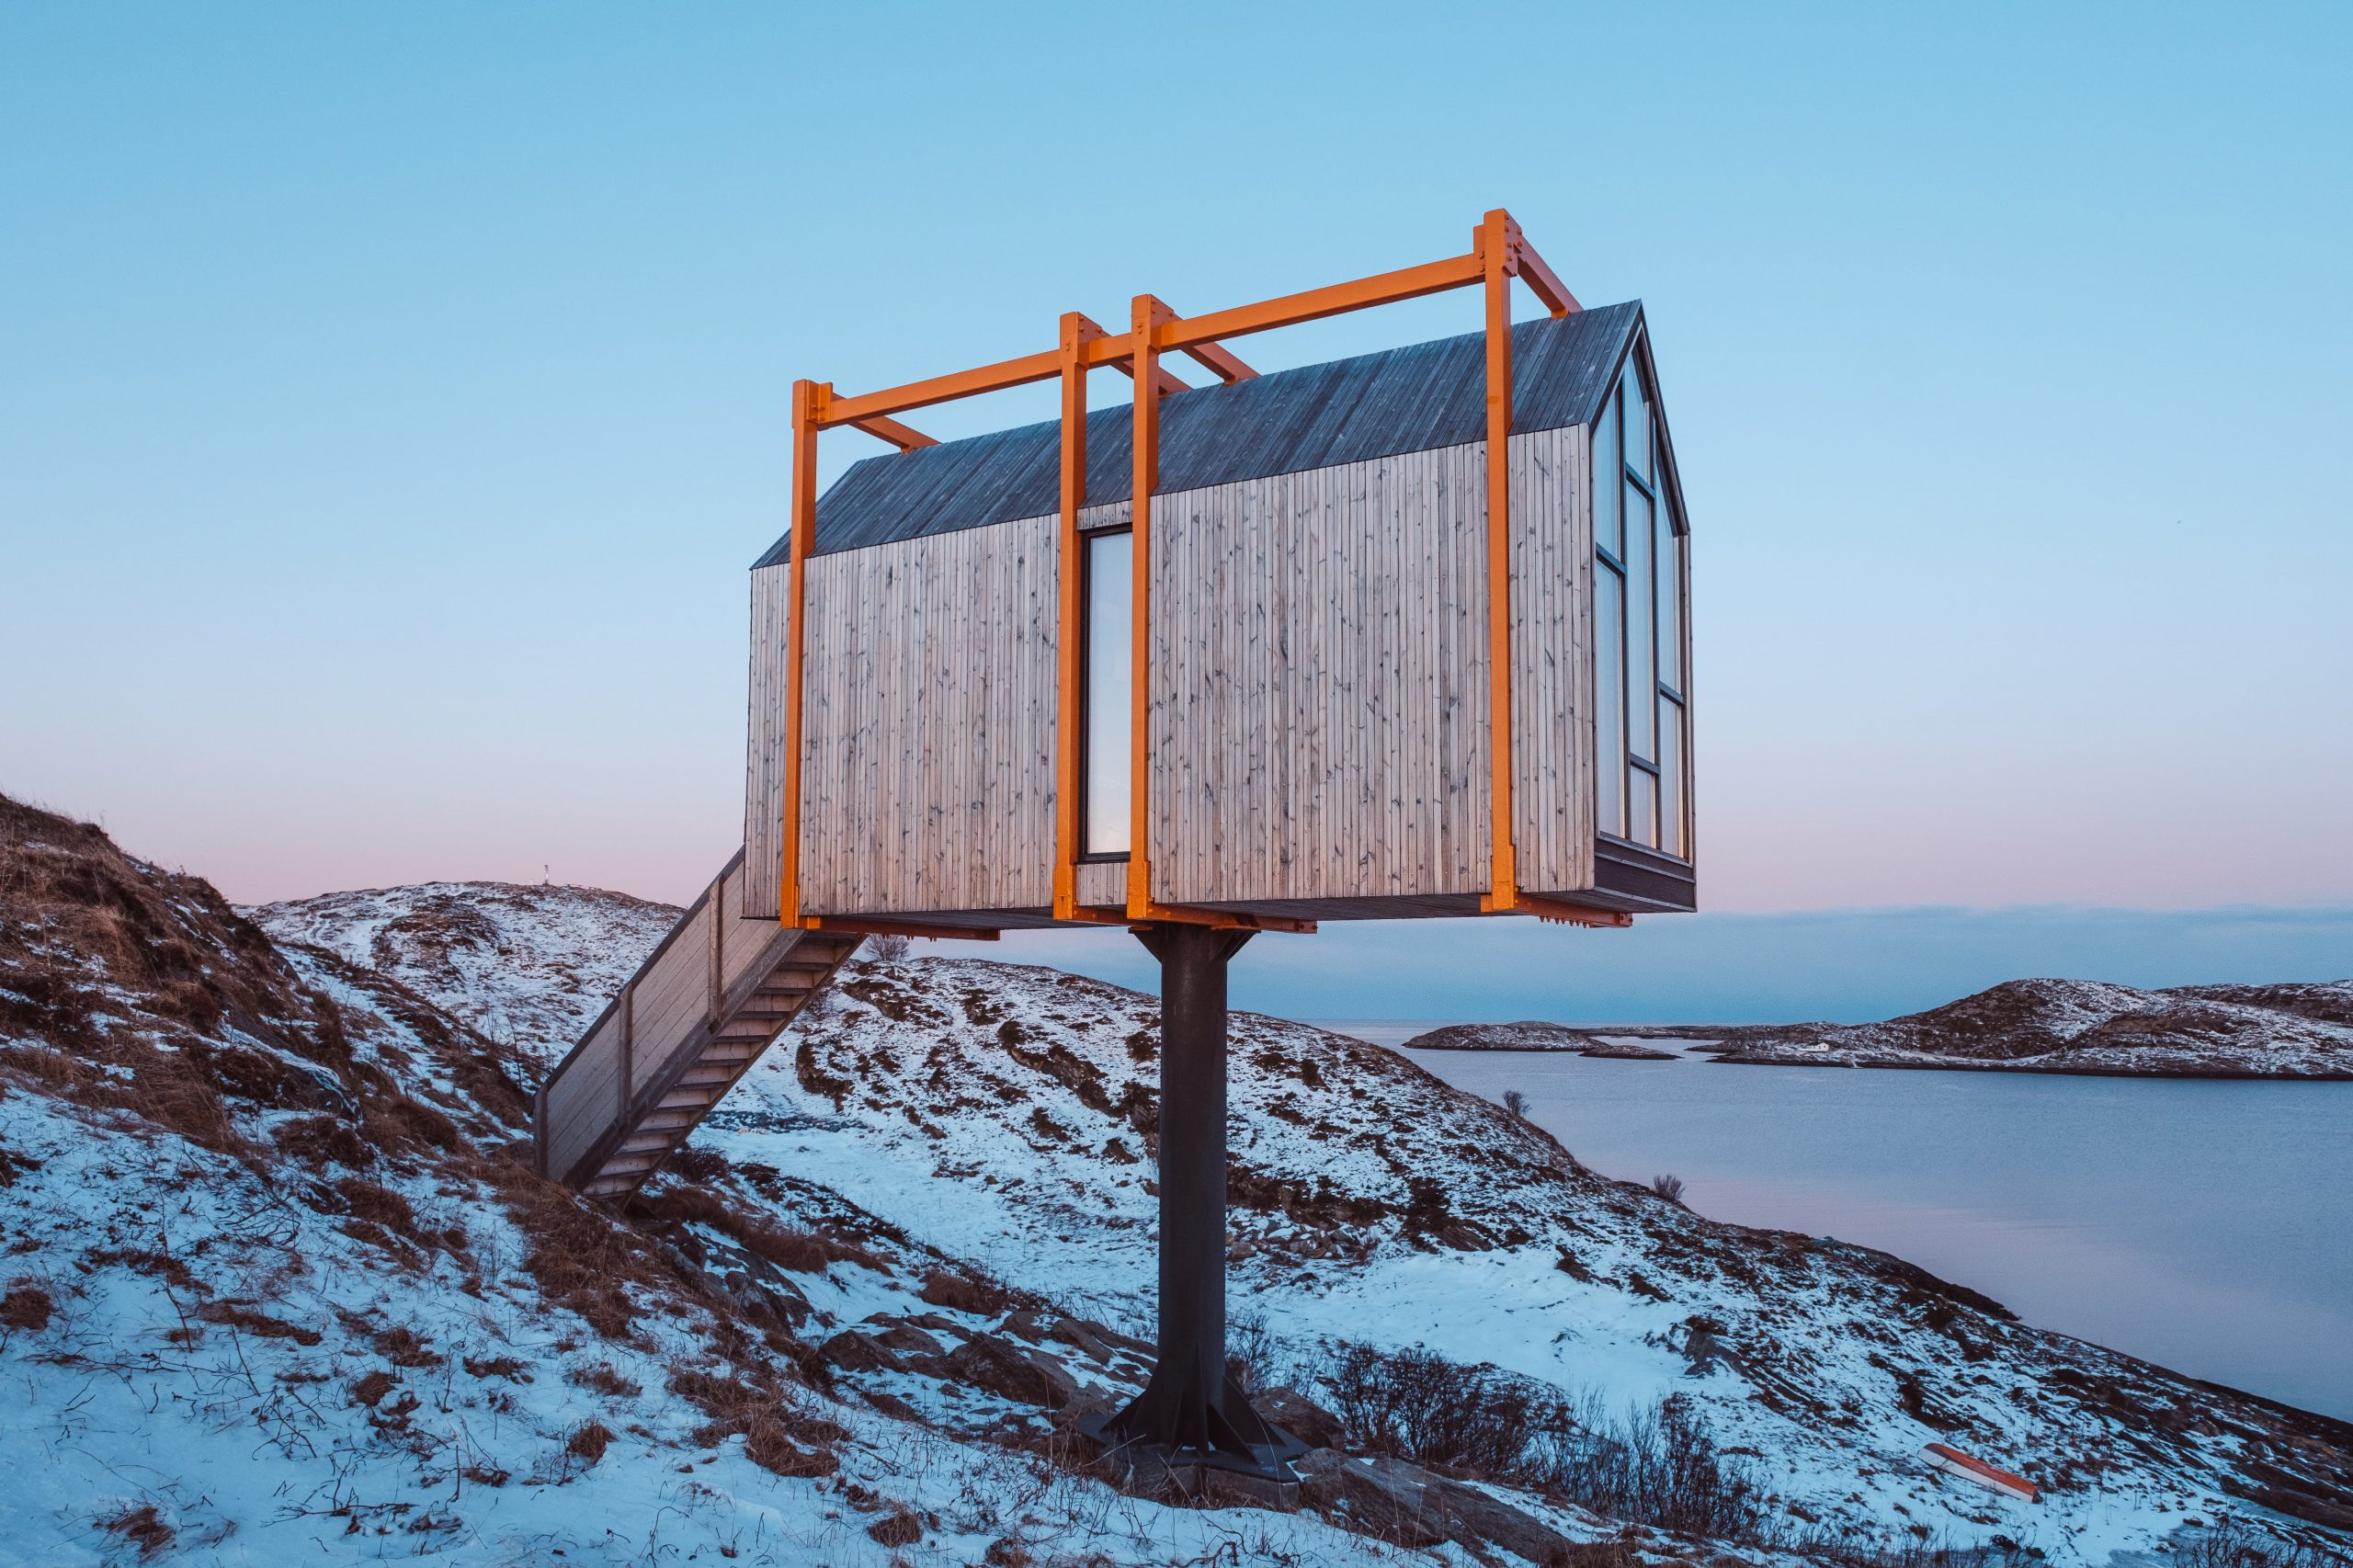 Arctic Hideaway in Fleinvaer, Norway features Kebony Modified Wood Character Cladding with a beautiful snowscape and sunset.